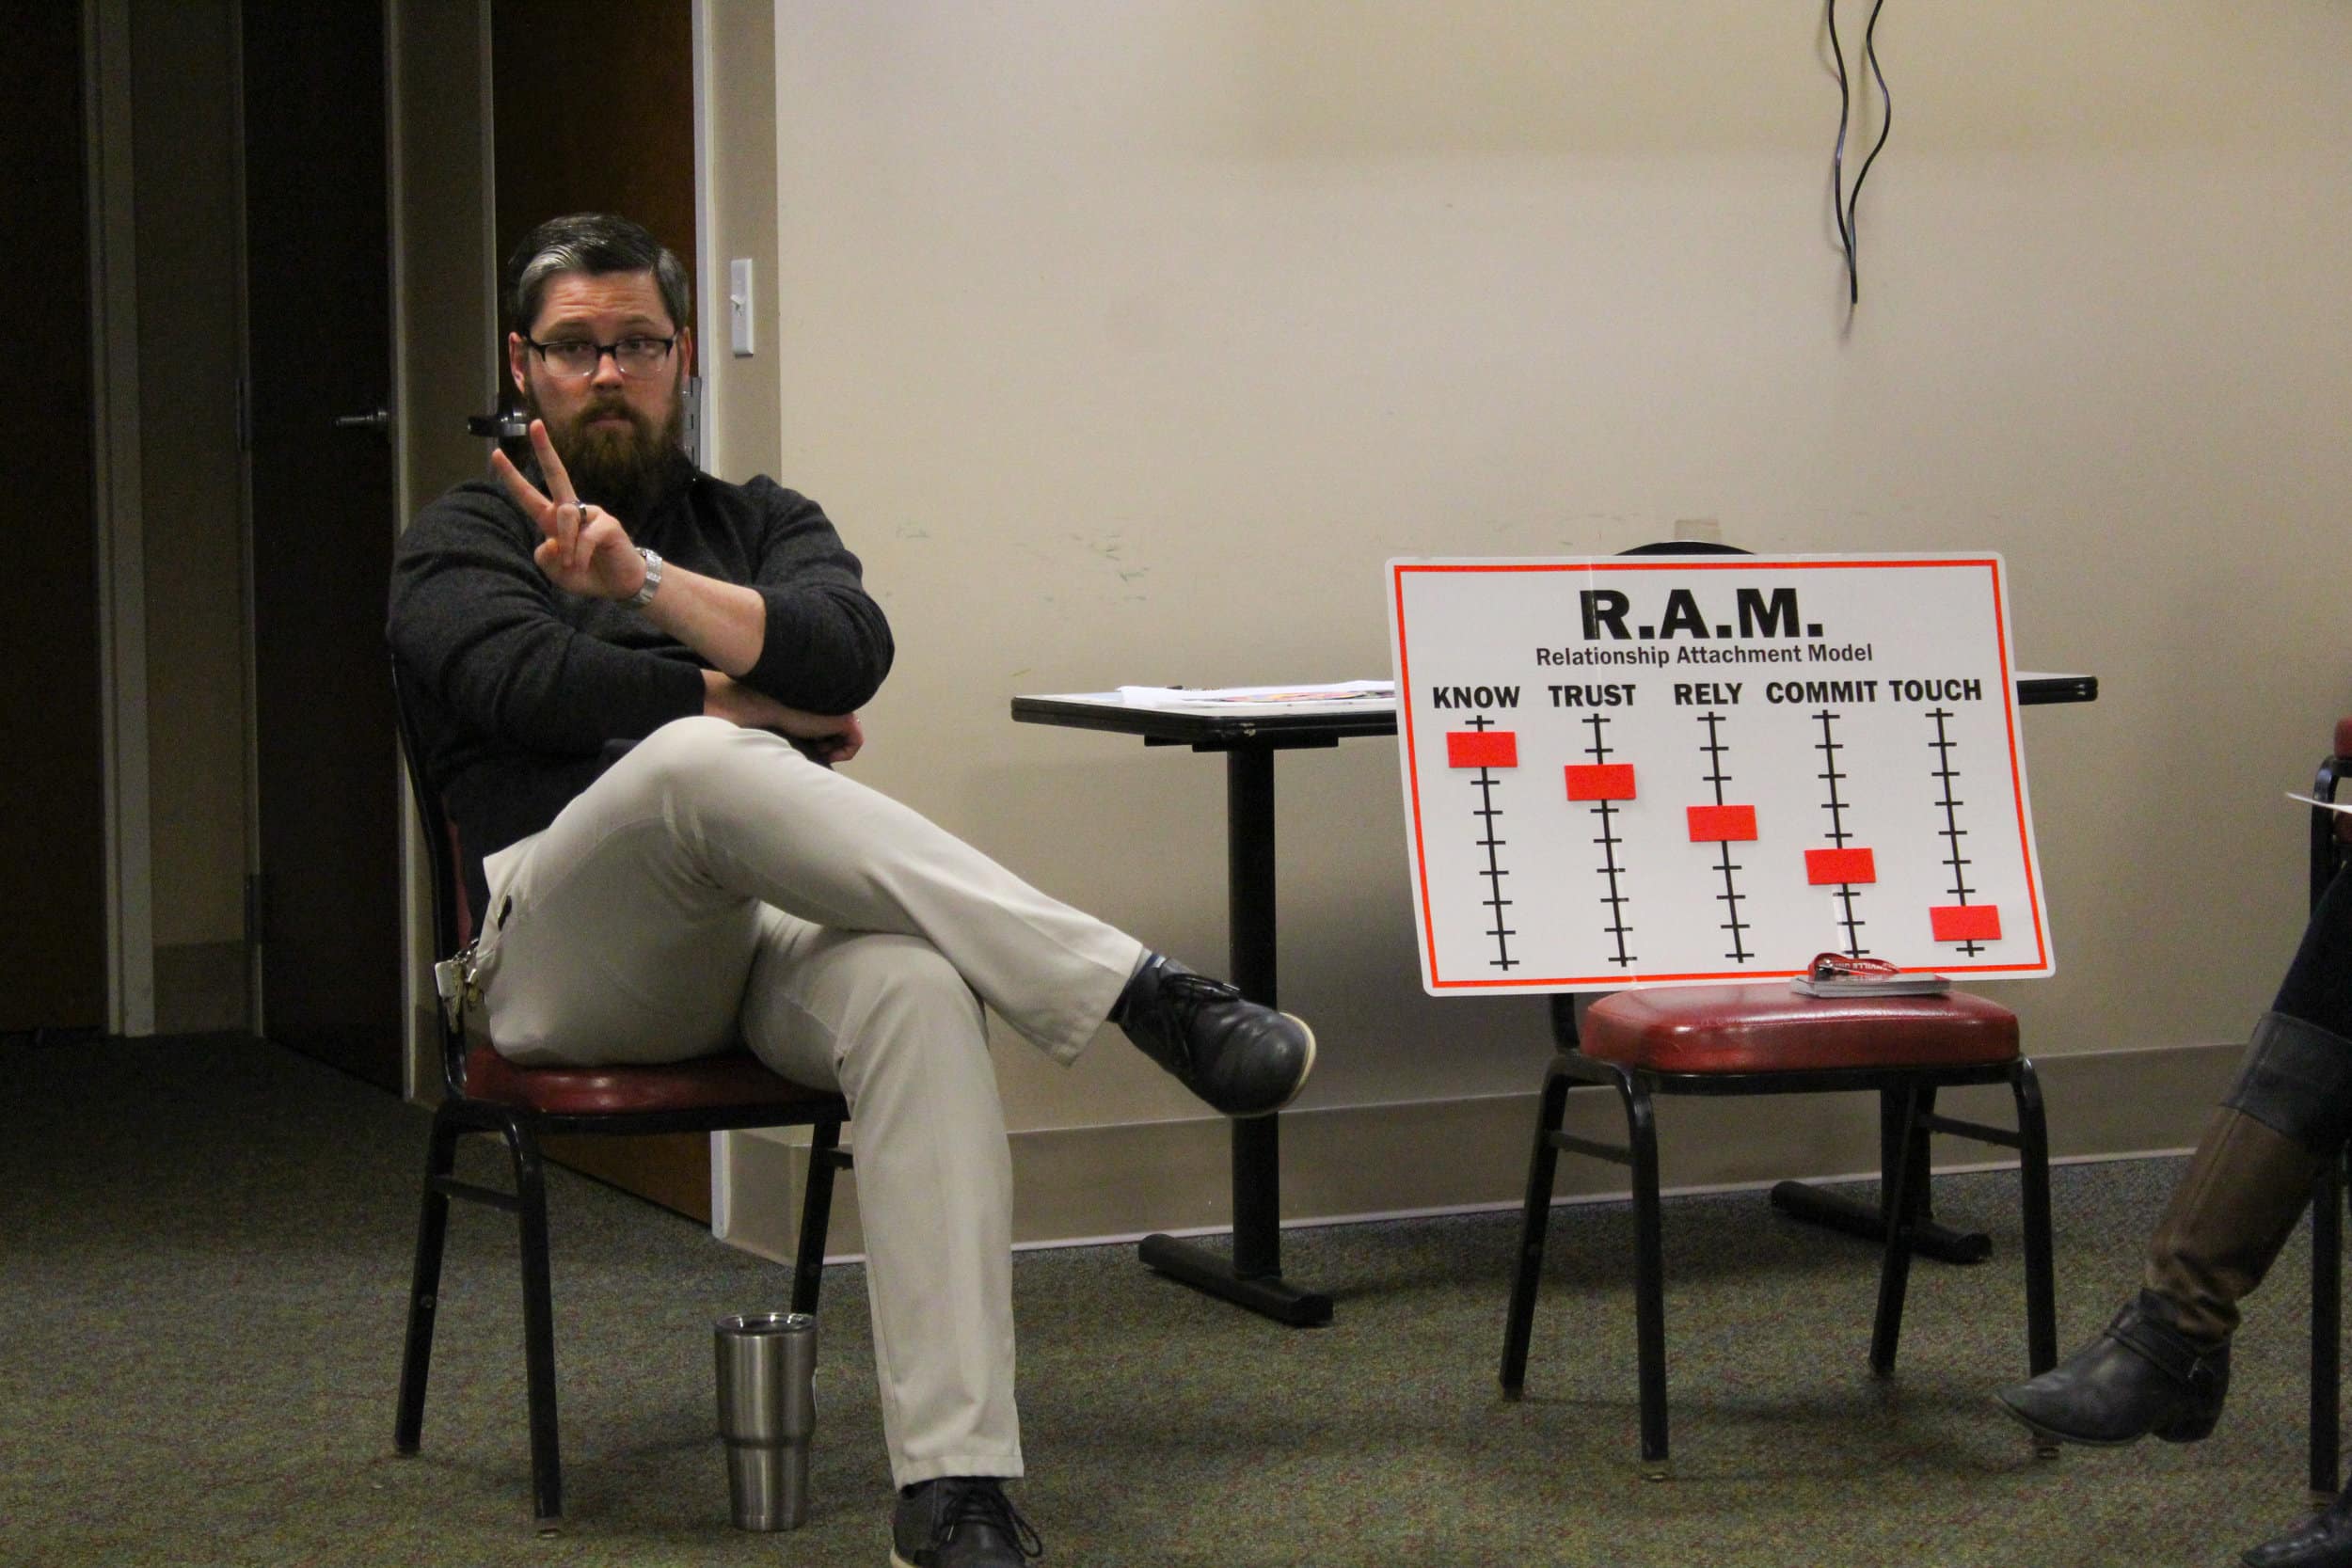 Mr. Thomas describes the R.A.M. model and how it relates to dating during college.